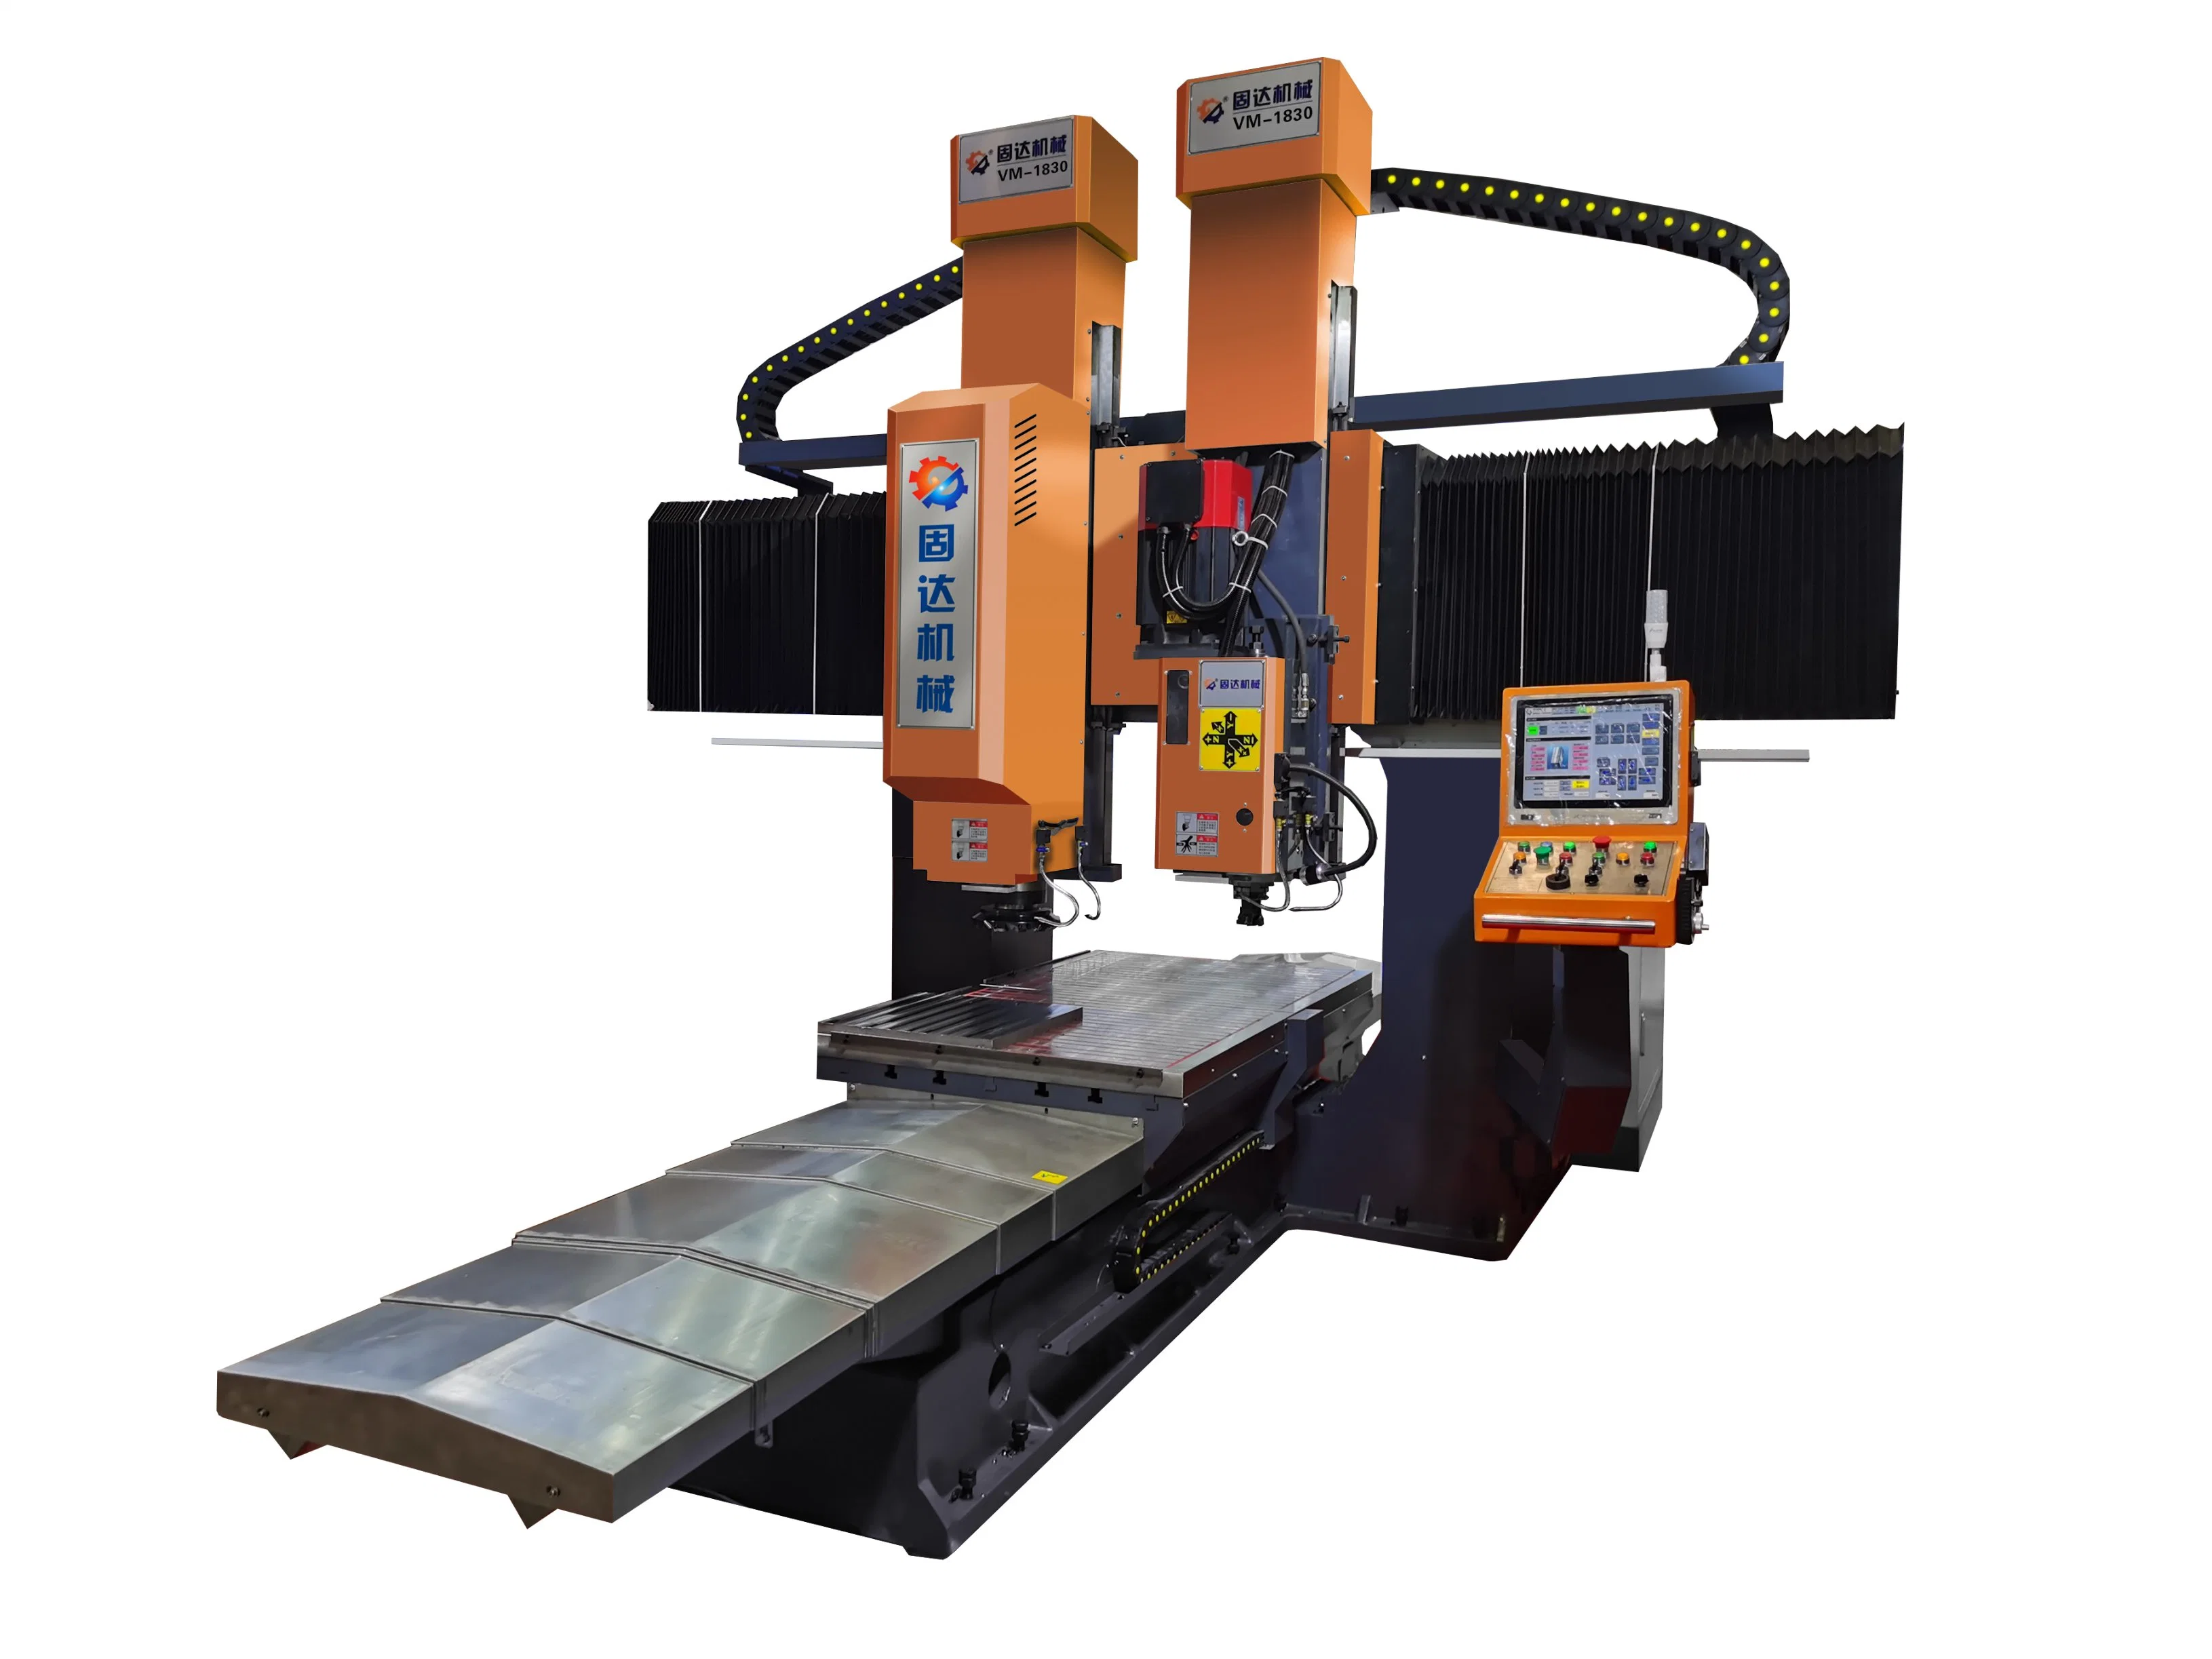 Factory-Price Machine CNC Gantry Milling Machine New Free Replacement Parts Within One Year Machine Tools with Two Separate Rough and Finish Cutter Vm-1830ncrg